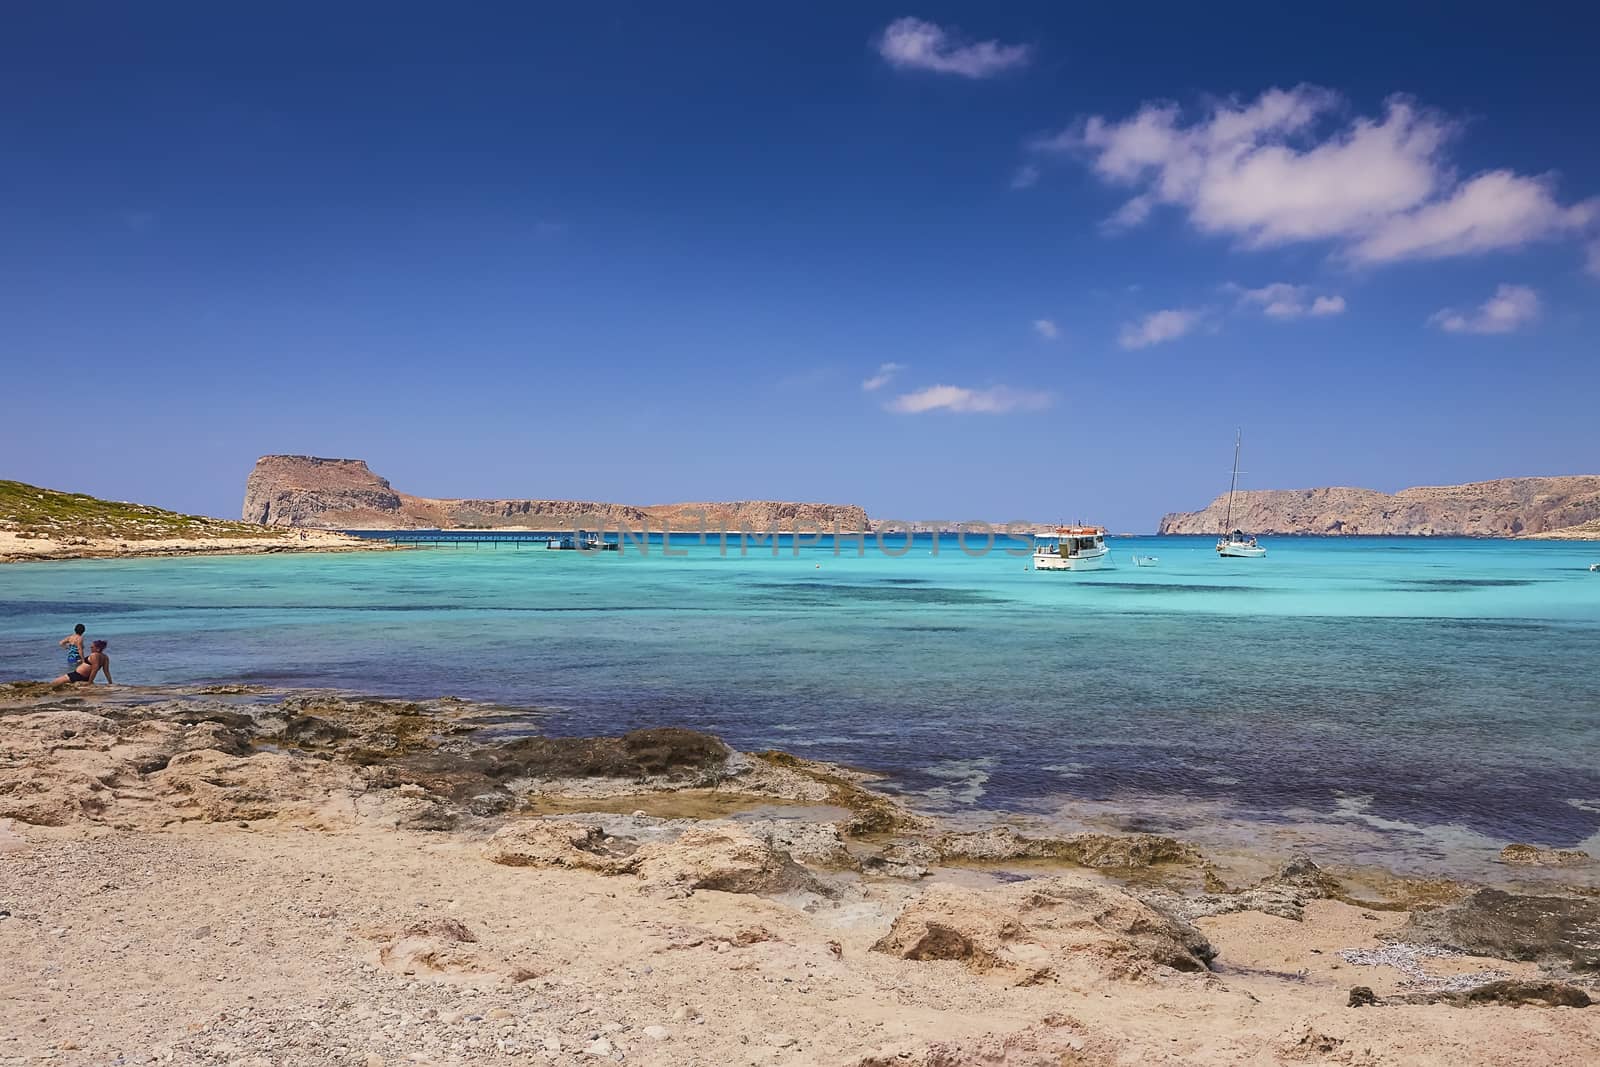 GRAMVOUSA - BALOS, THE CRETE ISLAND, GREECE - JUNE 4, 2019: The beautiful seaview and the people on the beach of Gramvousa.